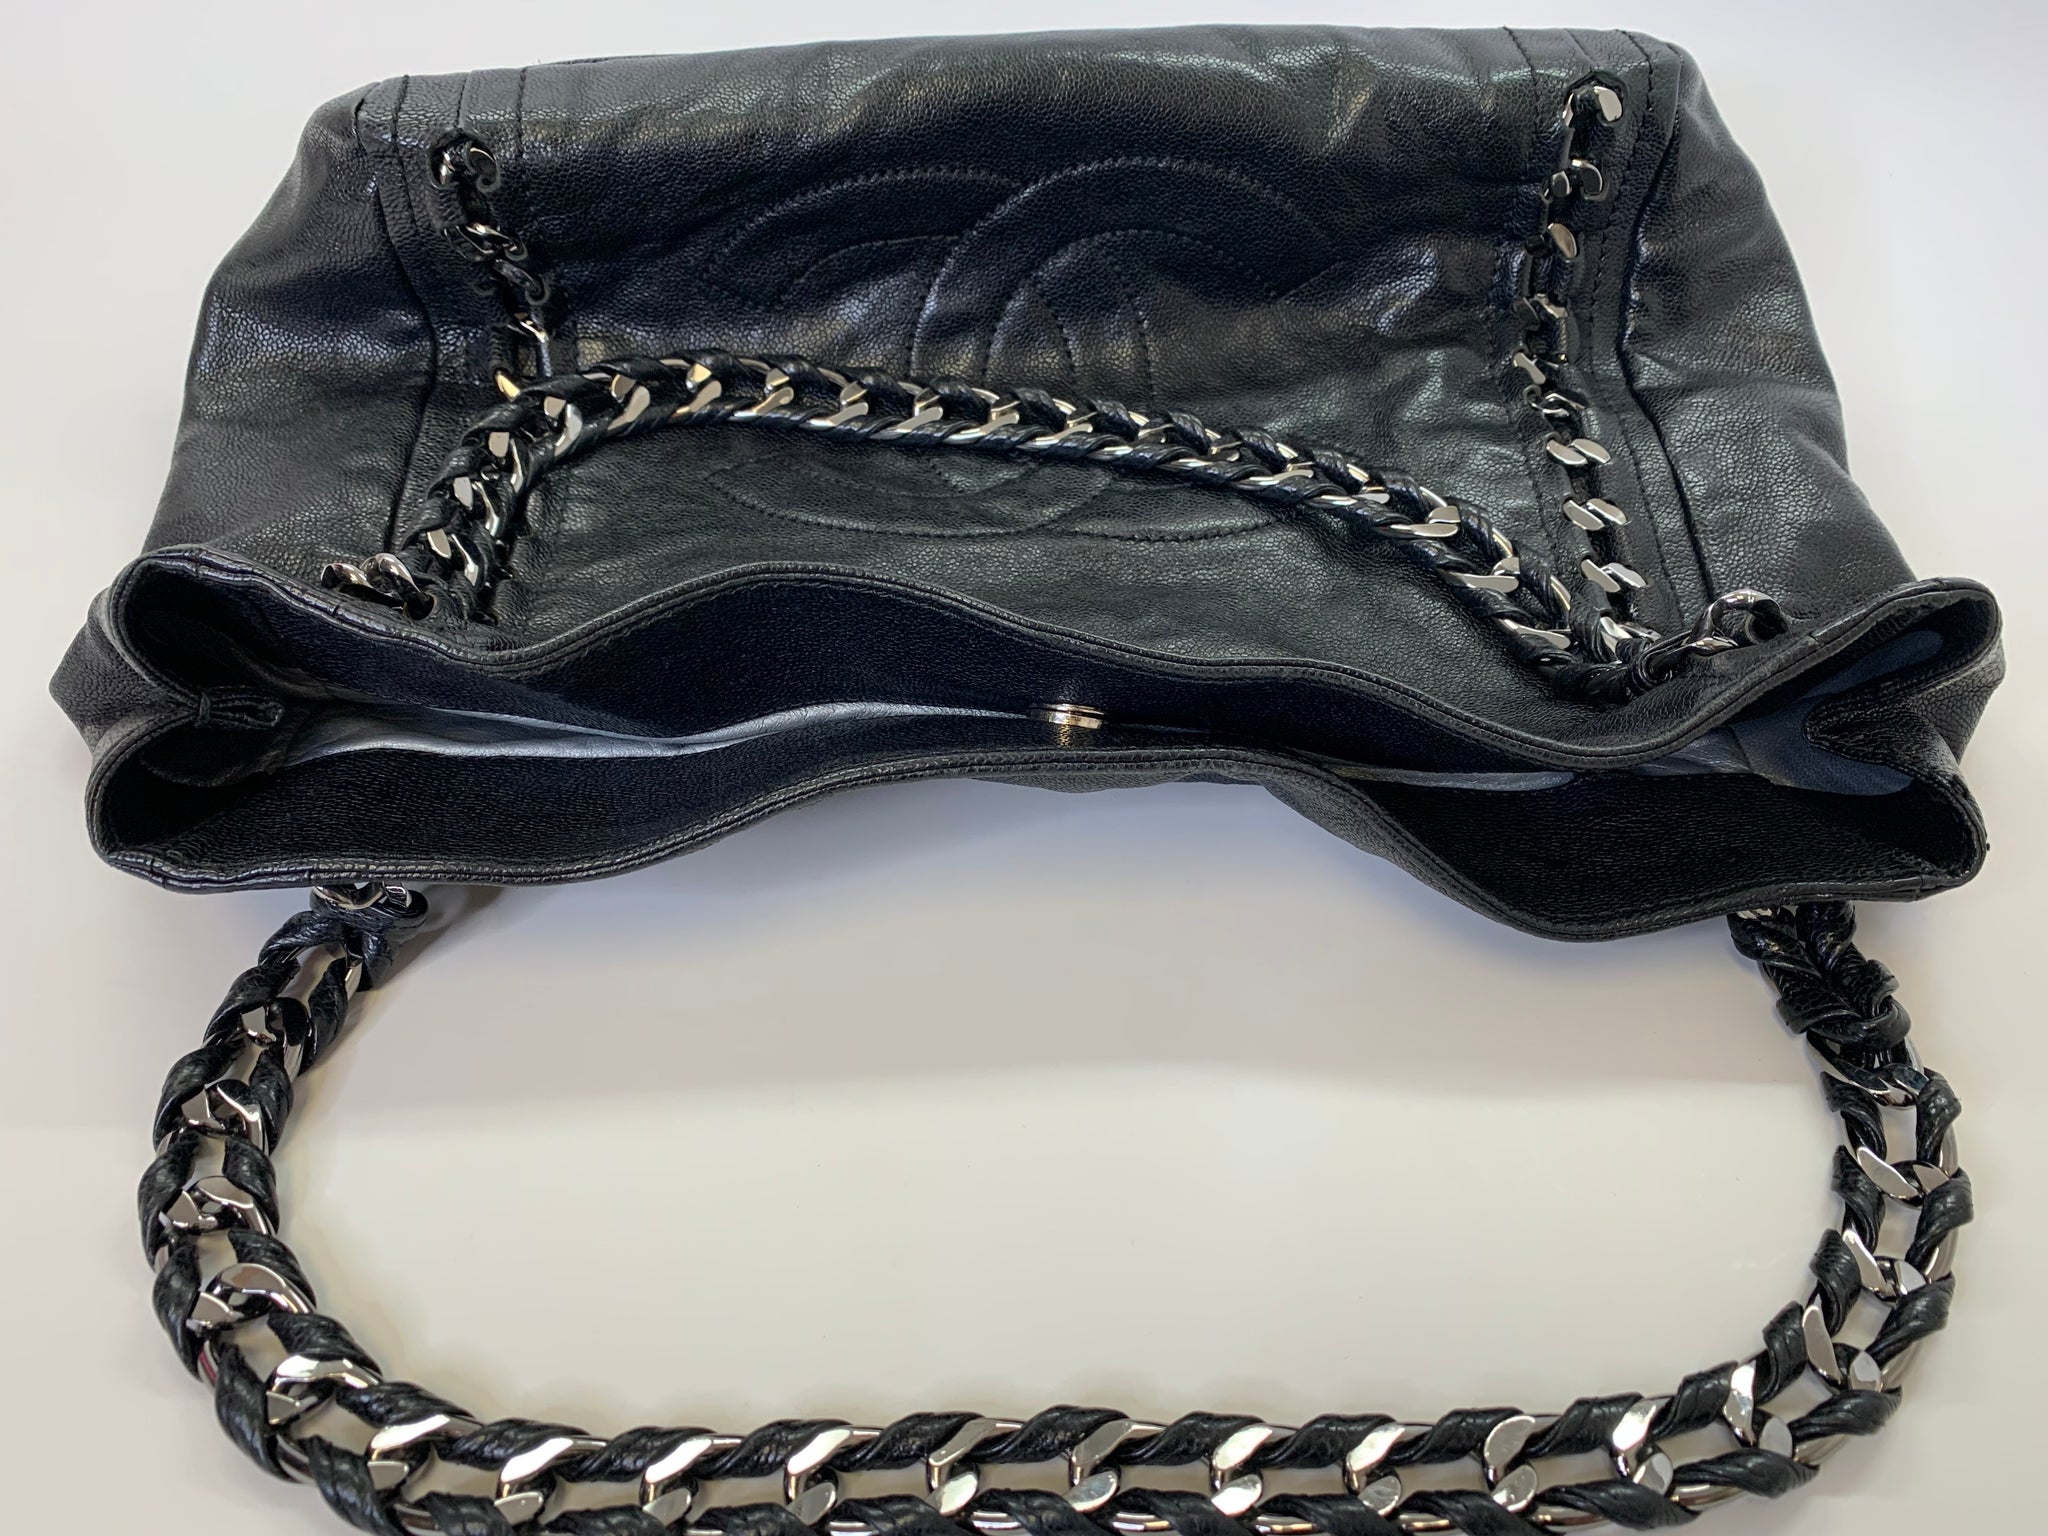 Chanel Pewter Chain Tote